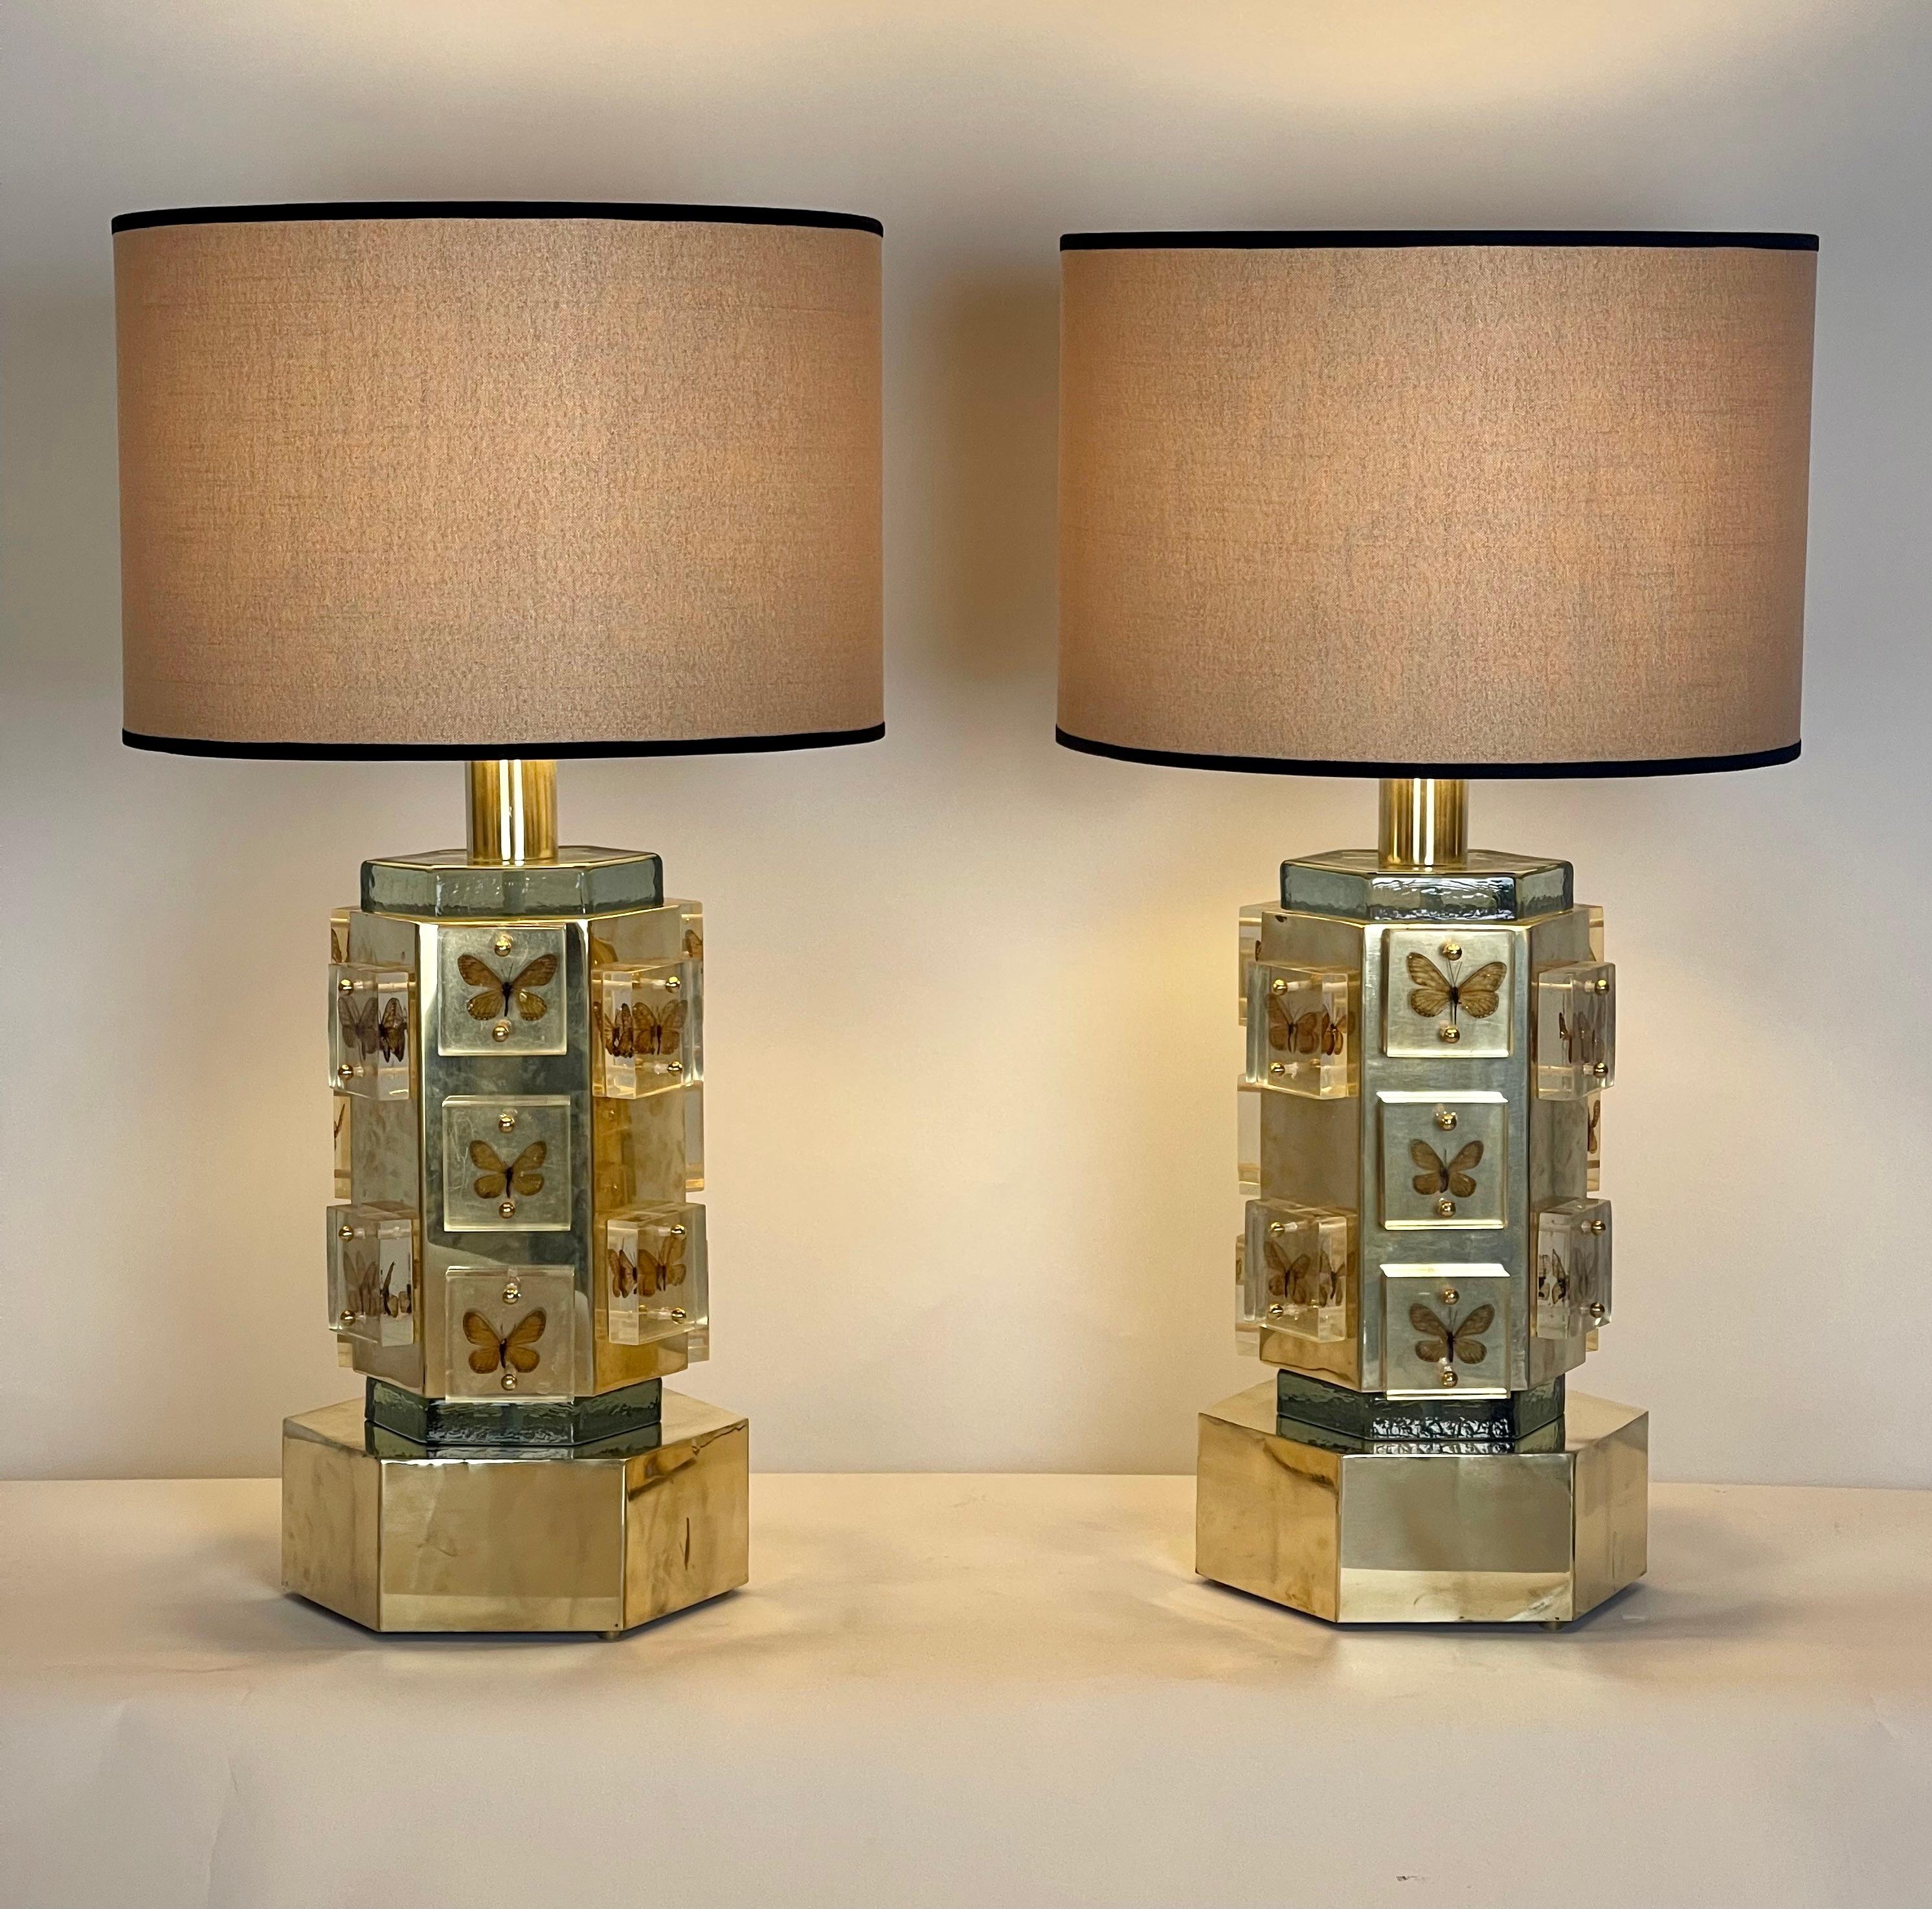 Each table lamp has an hexagonal brass body with two hexagonal green murano glass plates and 15 butterflies encased in plexiglass squared blocks.
Beige cottone shades, size: 45 Diameter x 30 Height cm. included.
Total lamp height with shade: 82